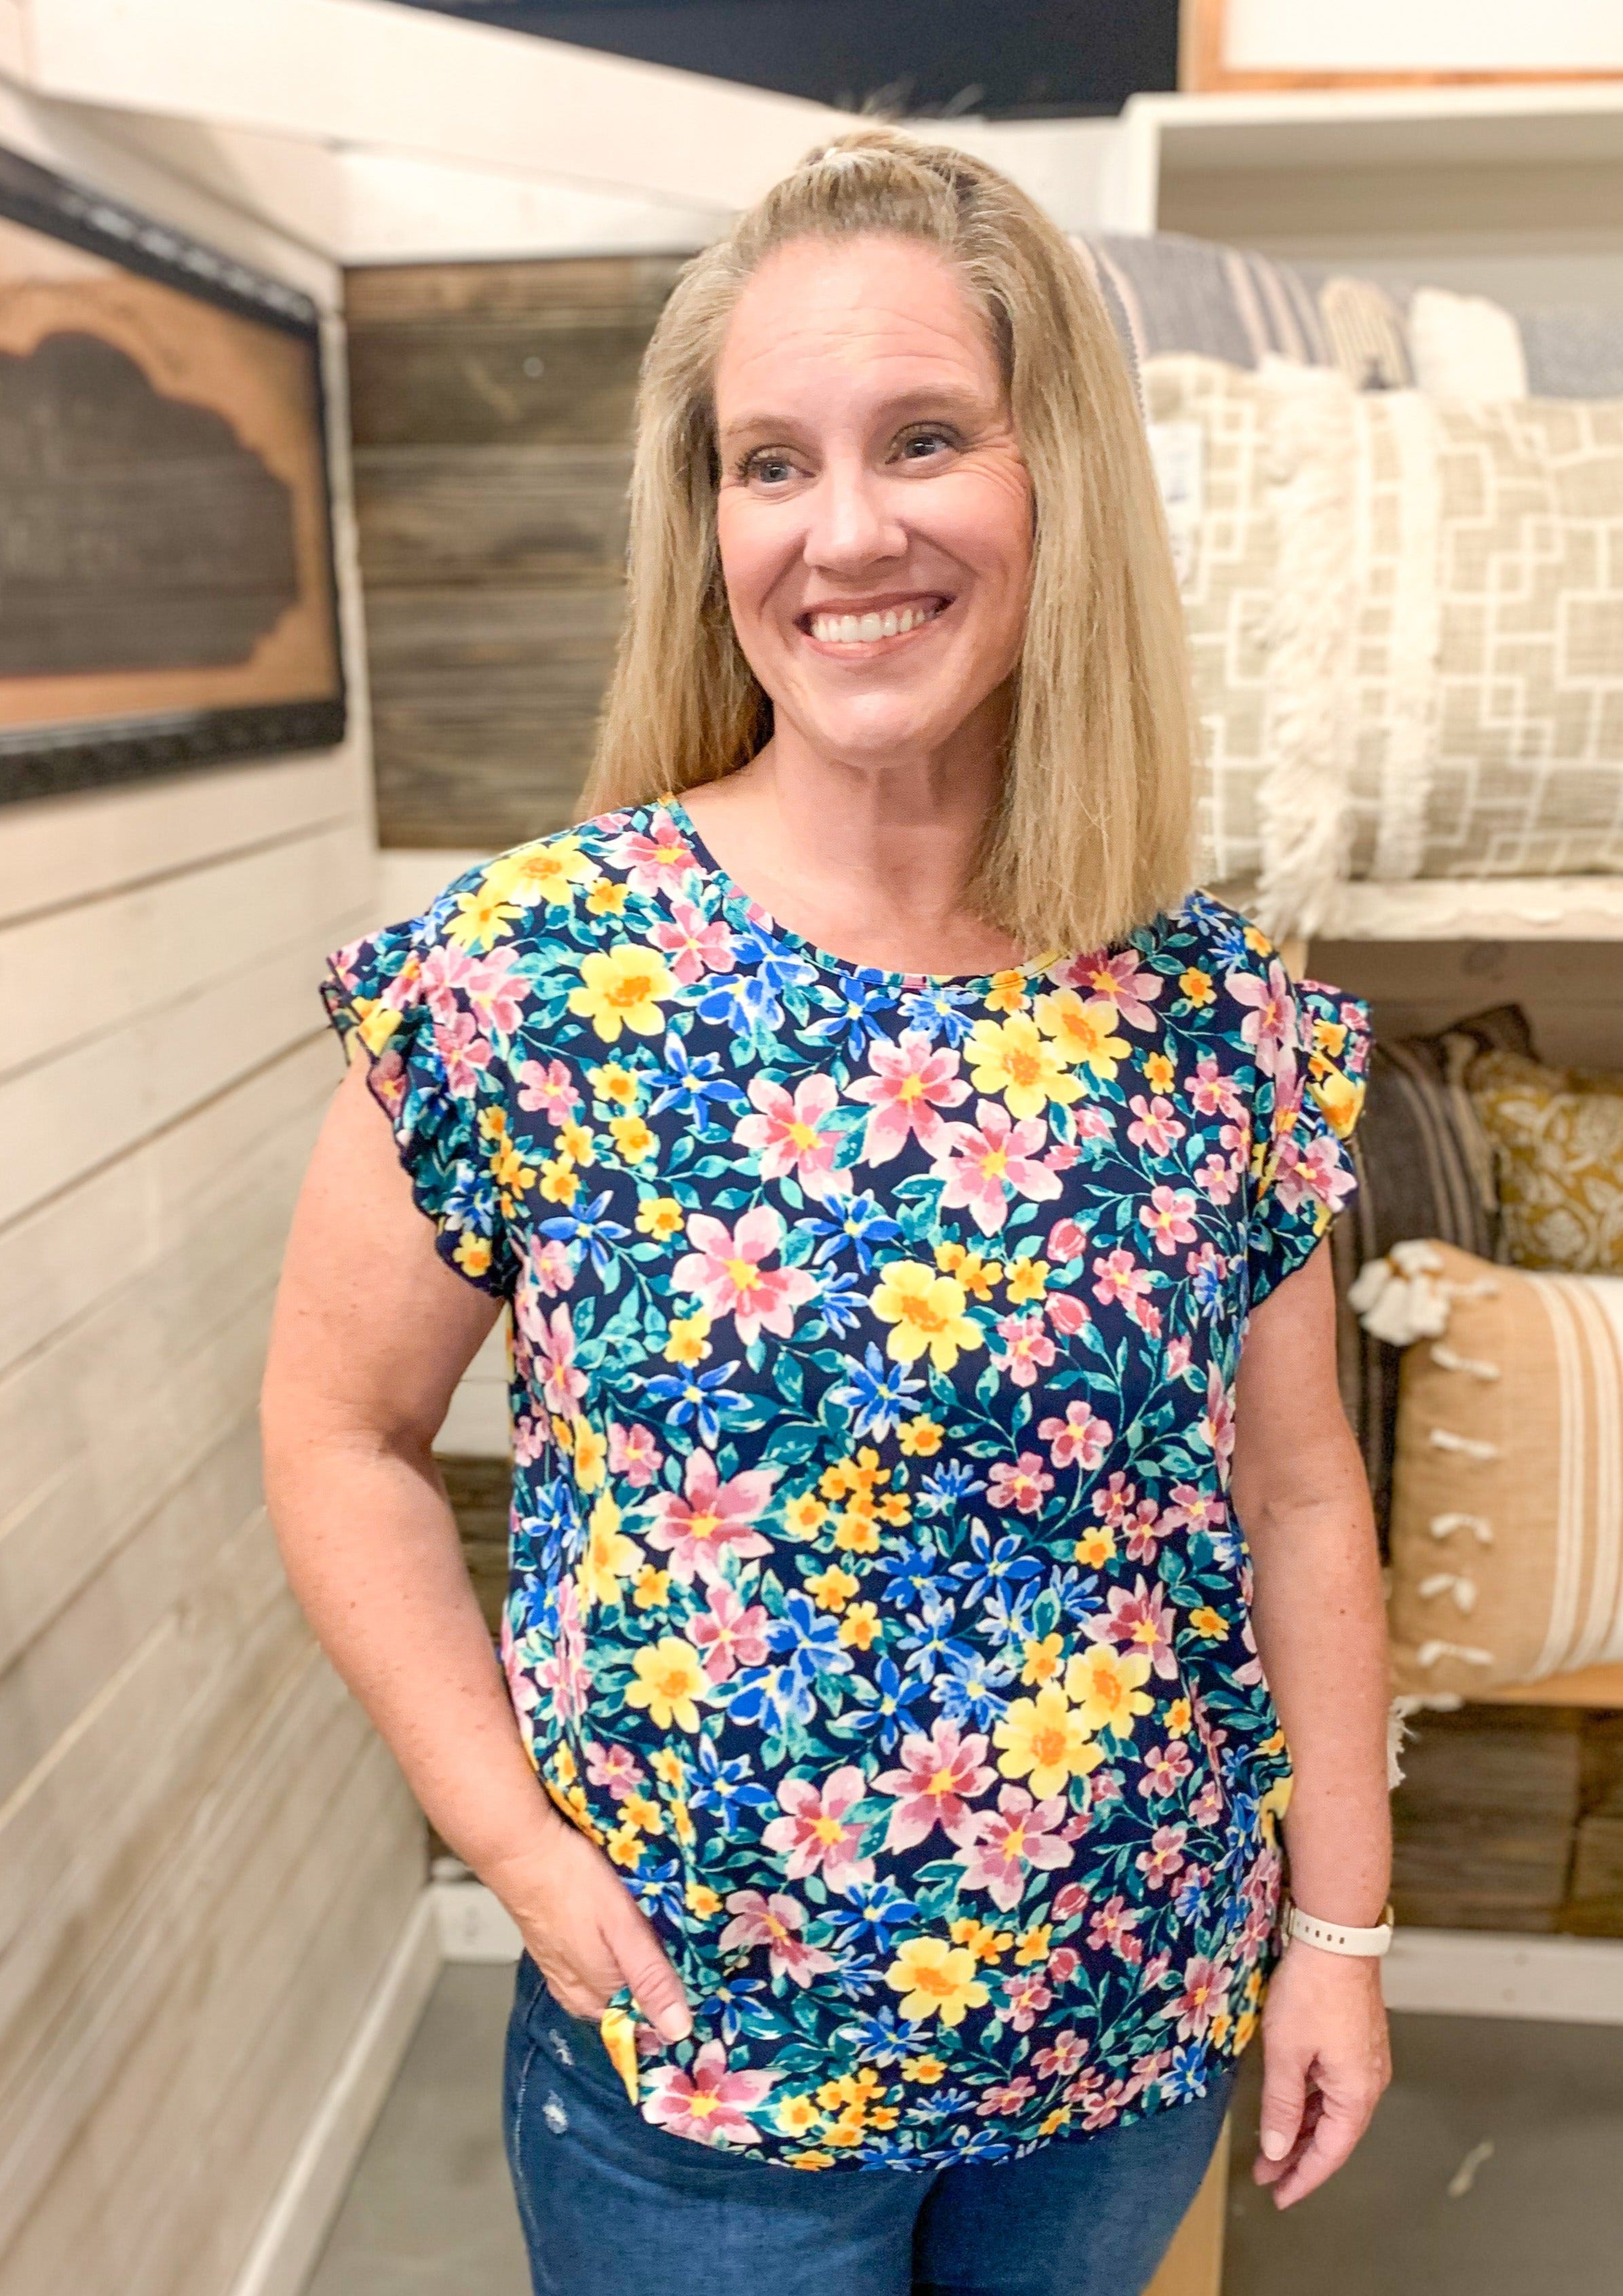 Navy top with ruffle sleeve detail with a fun floral pattern. Colors include pinks, yellows, blues, and greens.